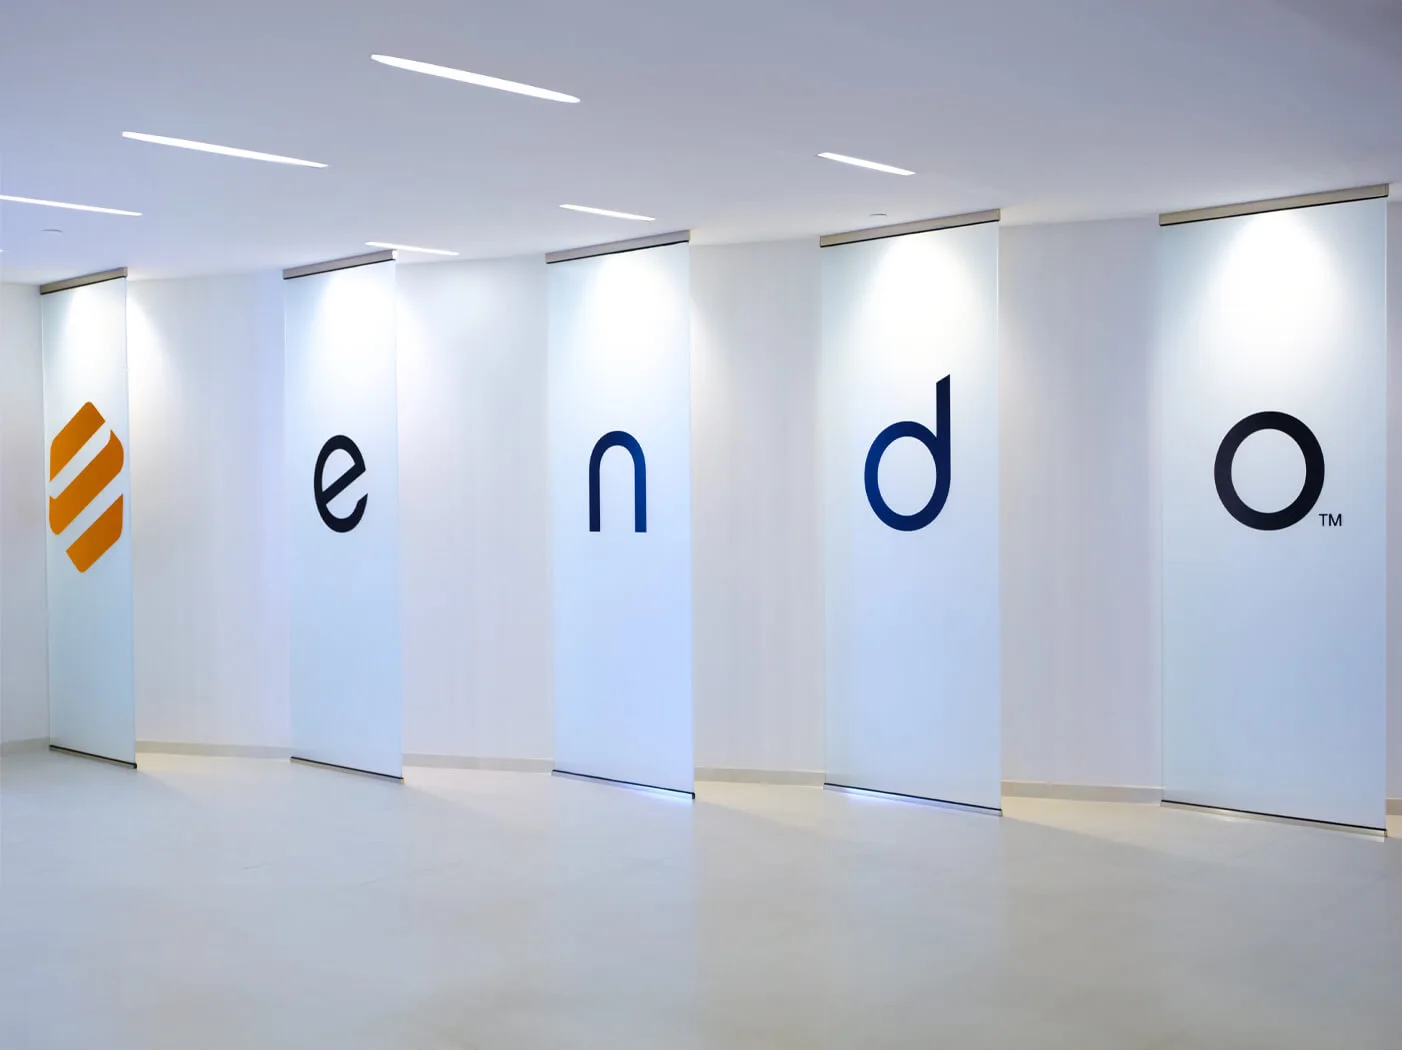 The Endo logo on the side of an office wall.